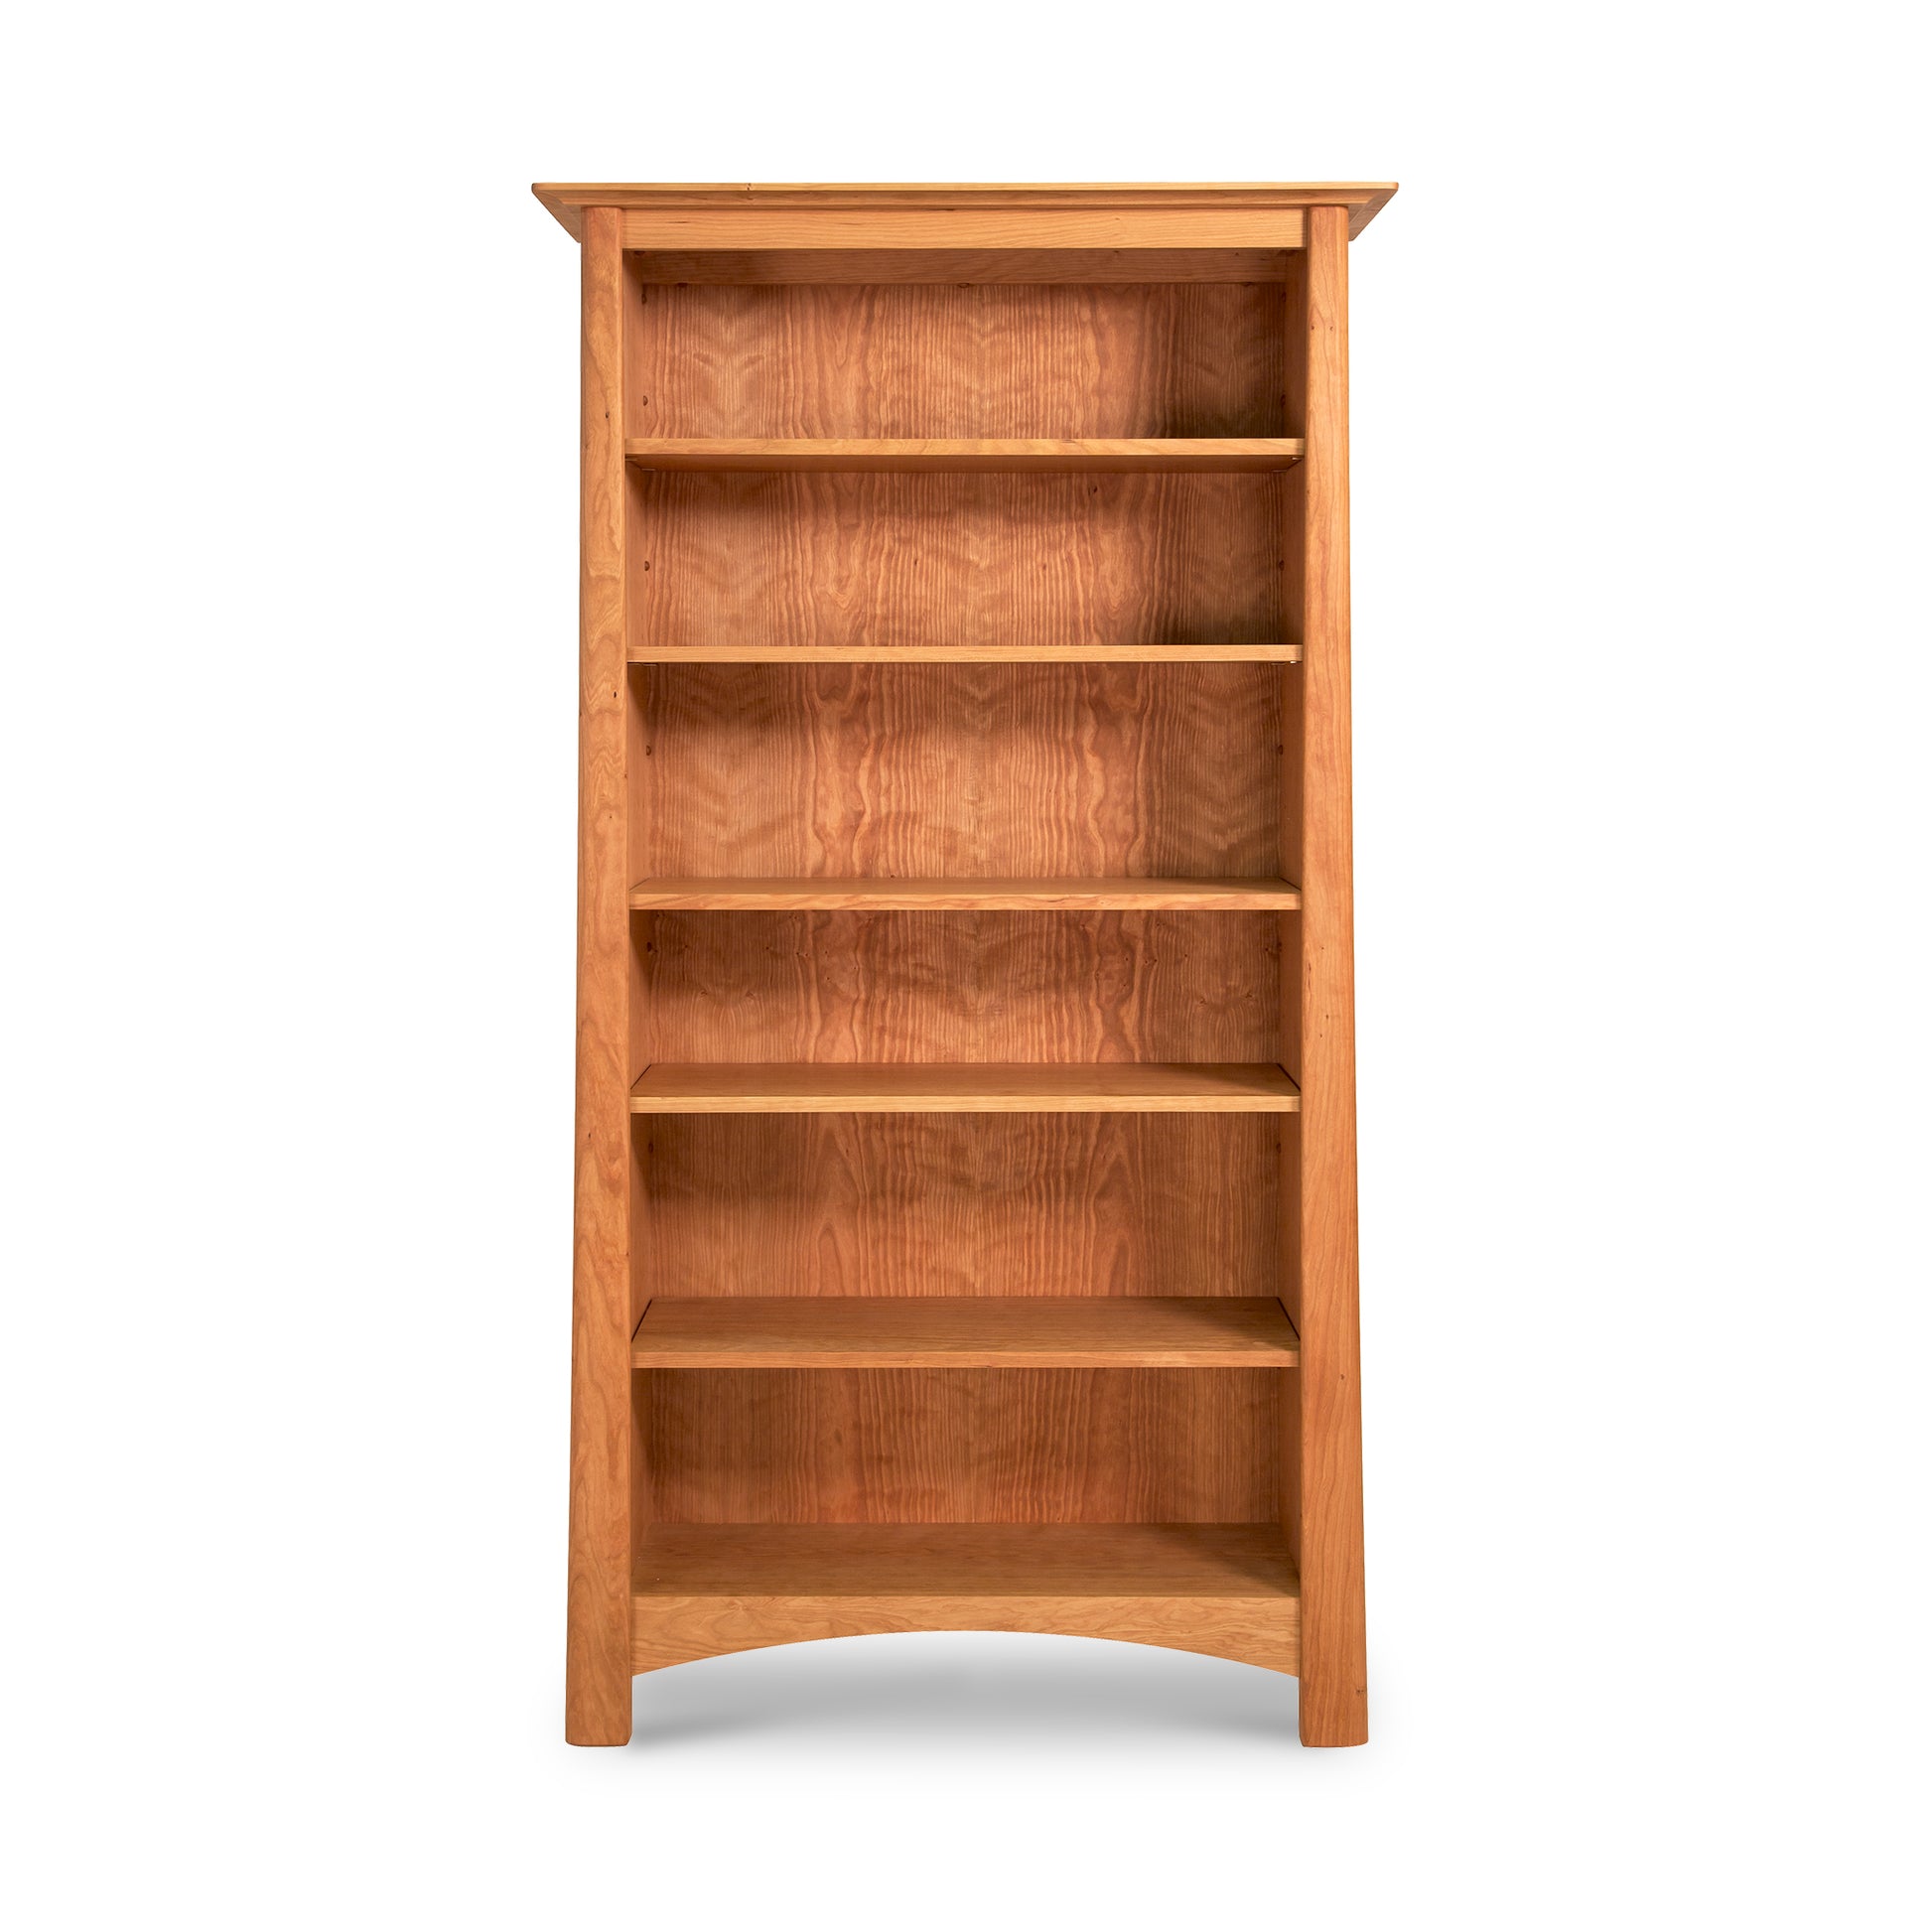 Cherry Moon bookcase with five shelves by Maple Corner Woodworks, sustainably harvested hardwoods, isolated on a white background.